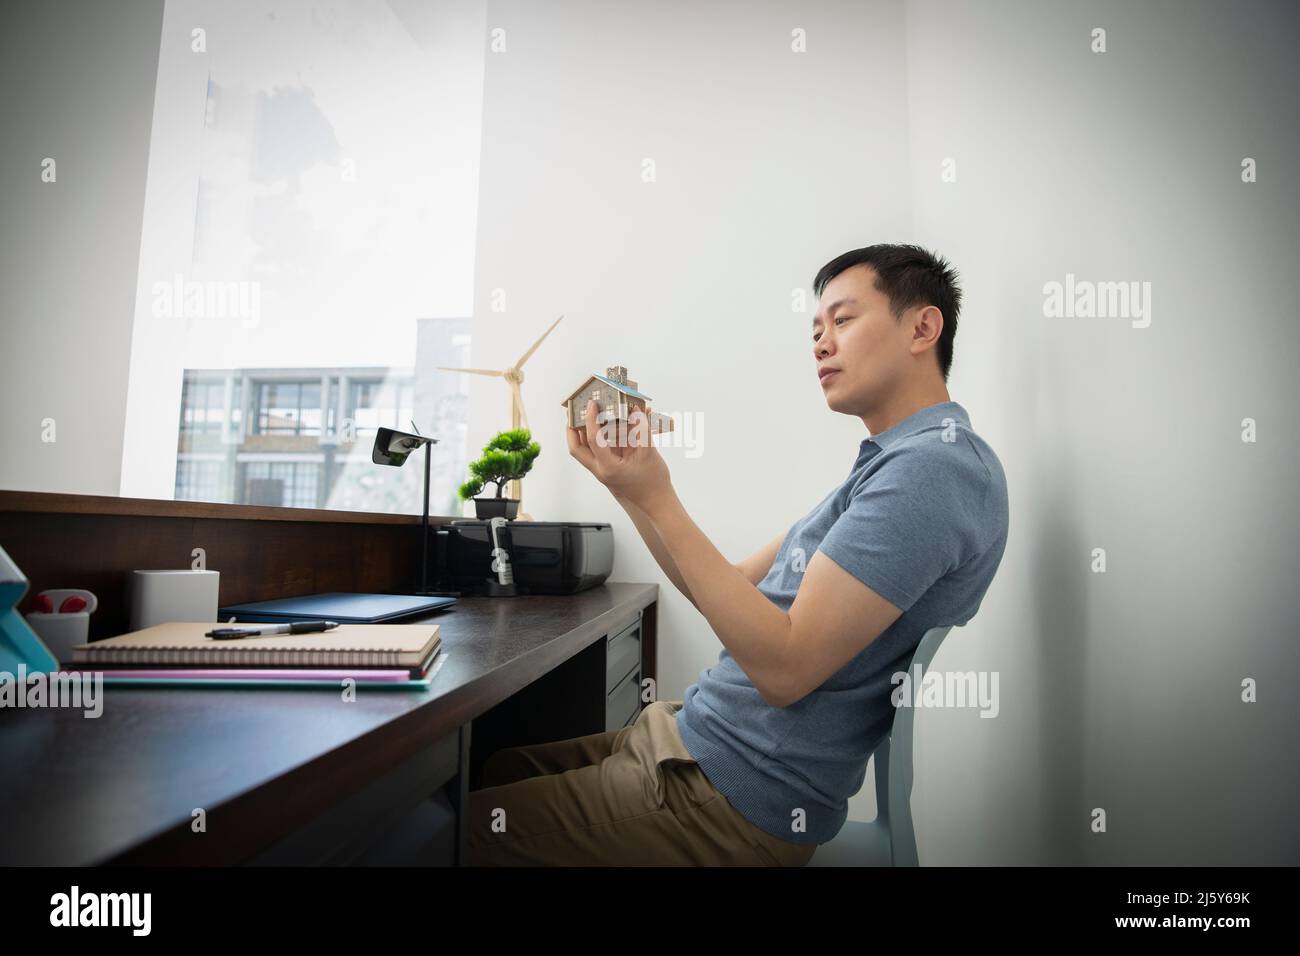 Male engineer looking at house model at office desk Stock Photo